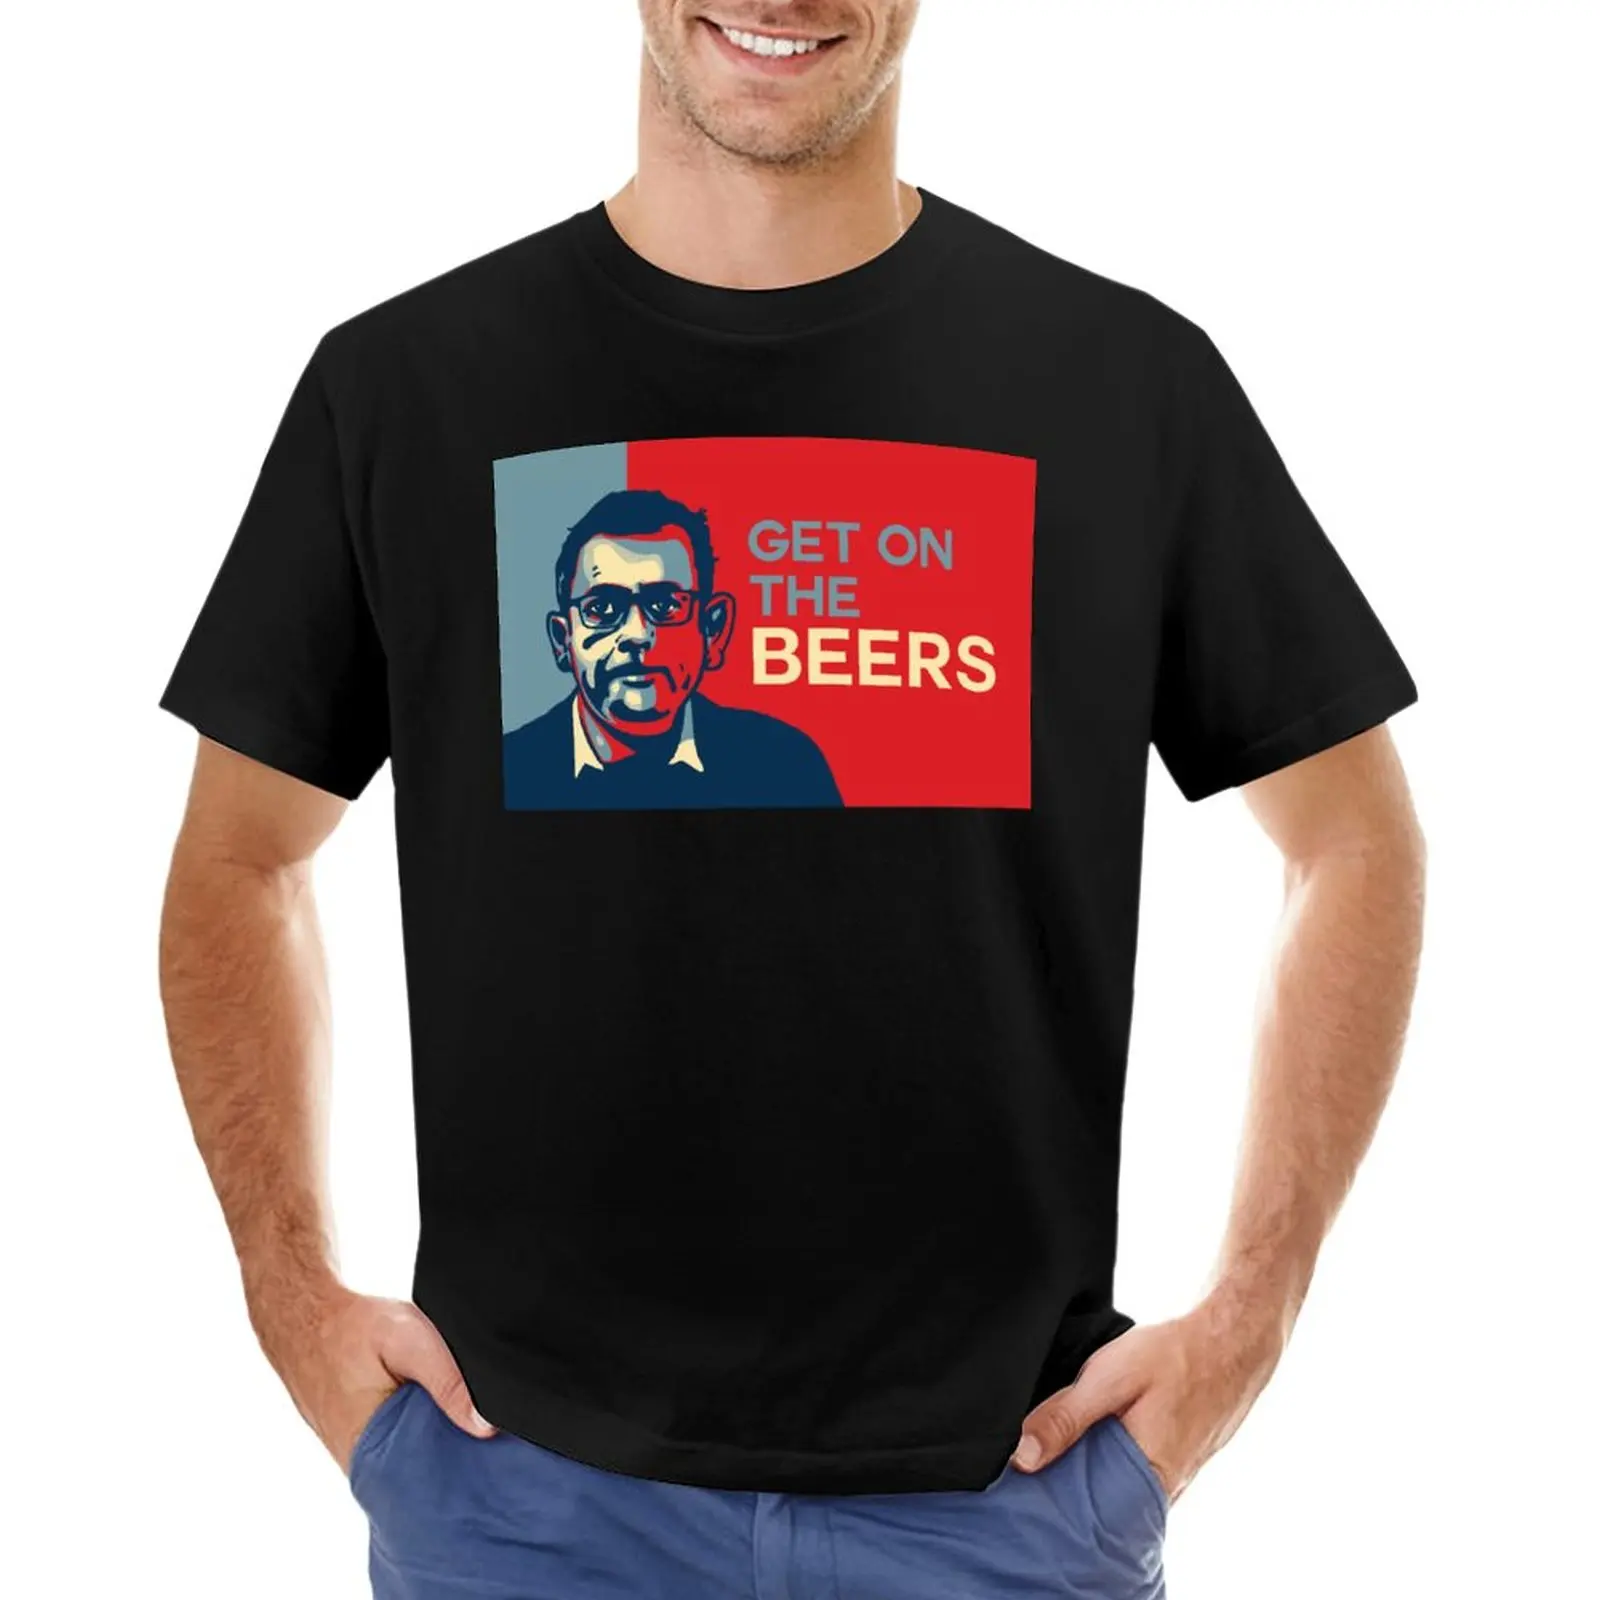 

Dan Andrews GET ON the beers T-Shirt quick-drying kawaii clothes t shirts for men pack